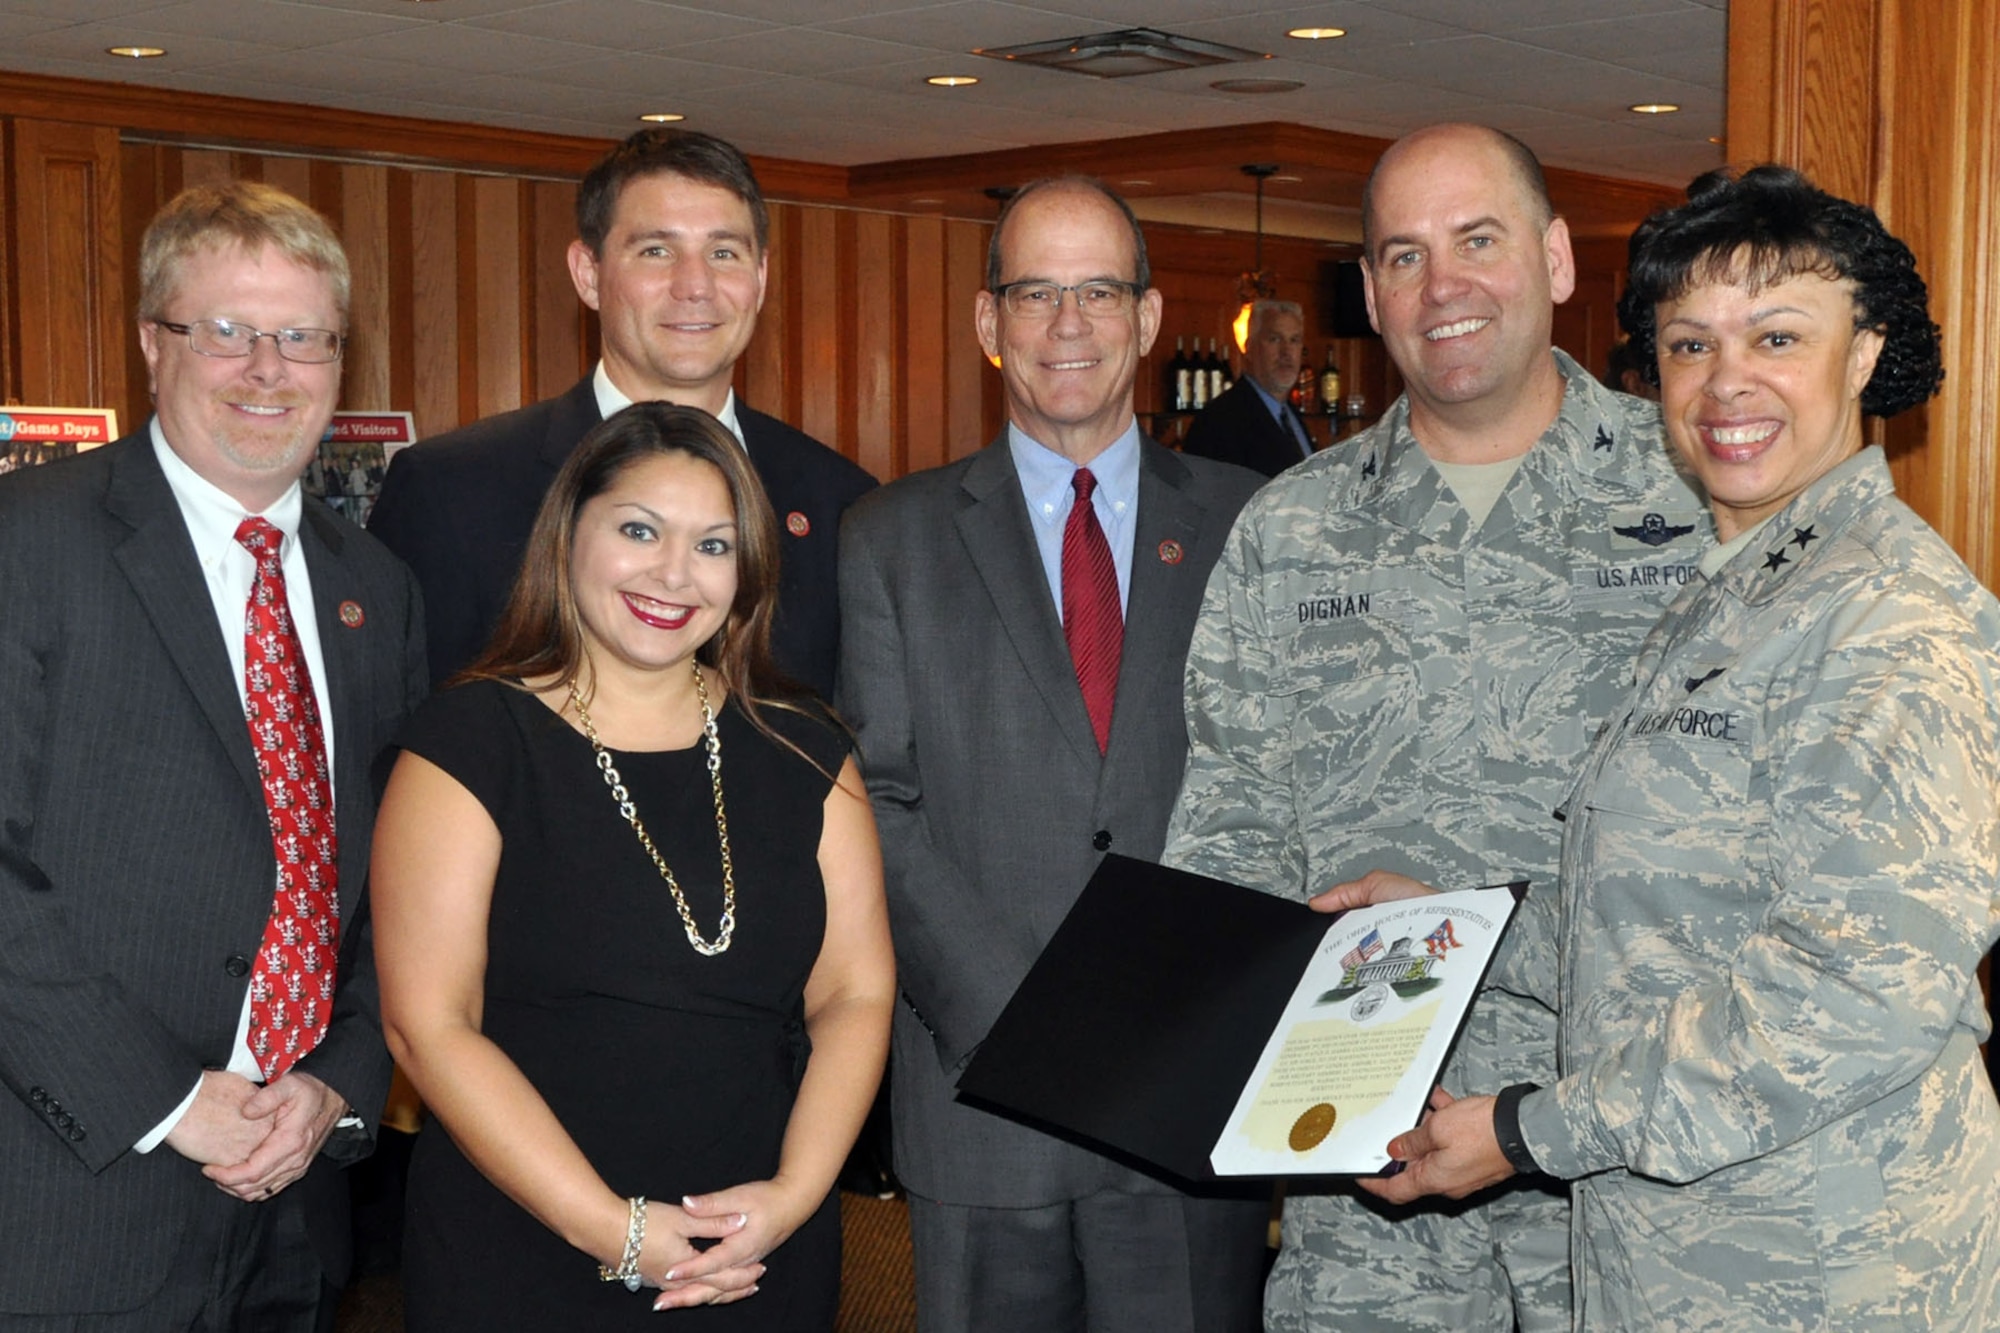 Air Force Reserve 22nd Air Force commander Maj. Gen. Stayce Harris (right) and Col. James Dignan, 910th Airlift Wing commander, stand with members of the Ohio State House of Representatives Mahoning Valley delegation during a Community Welcome Luncheon held at Squaw Creek Country Club here, Dec. 4, 2015. The state legislators, including 63rd District Representative Sean O’ Brien (left), 32nd District Senator Capri Cafaro (front), 59th District Representative John Boccieri (rear) and 64th District Representative Michael O’Brien (center) presented Harris with an state of Ohio pennant and an accompanying certificate as part of the festivities welcoming the general to the Mahoning Valley during her visit to nearby Youngstown Air Reserve Station (YARS), Ohio. Harris visited YARS to get an up close look at the 910th’s mission capabilities including the Department of Defense’s only large-area, fixed wing aerial spray mission and the roles more than 1800 personnel assigned to YARS have in national defense. (U.S. Air Force photo/Master Sgt. Bob Barko Jr.)